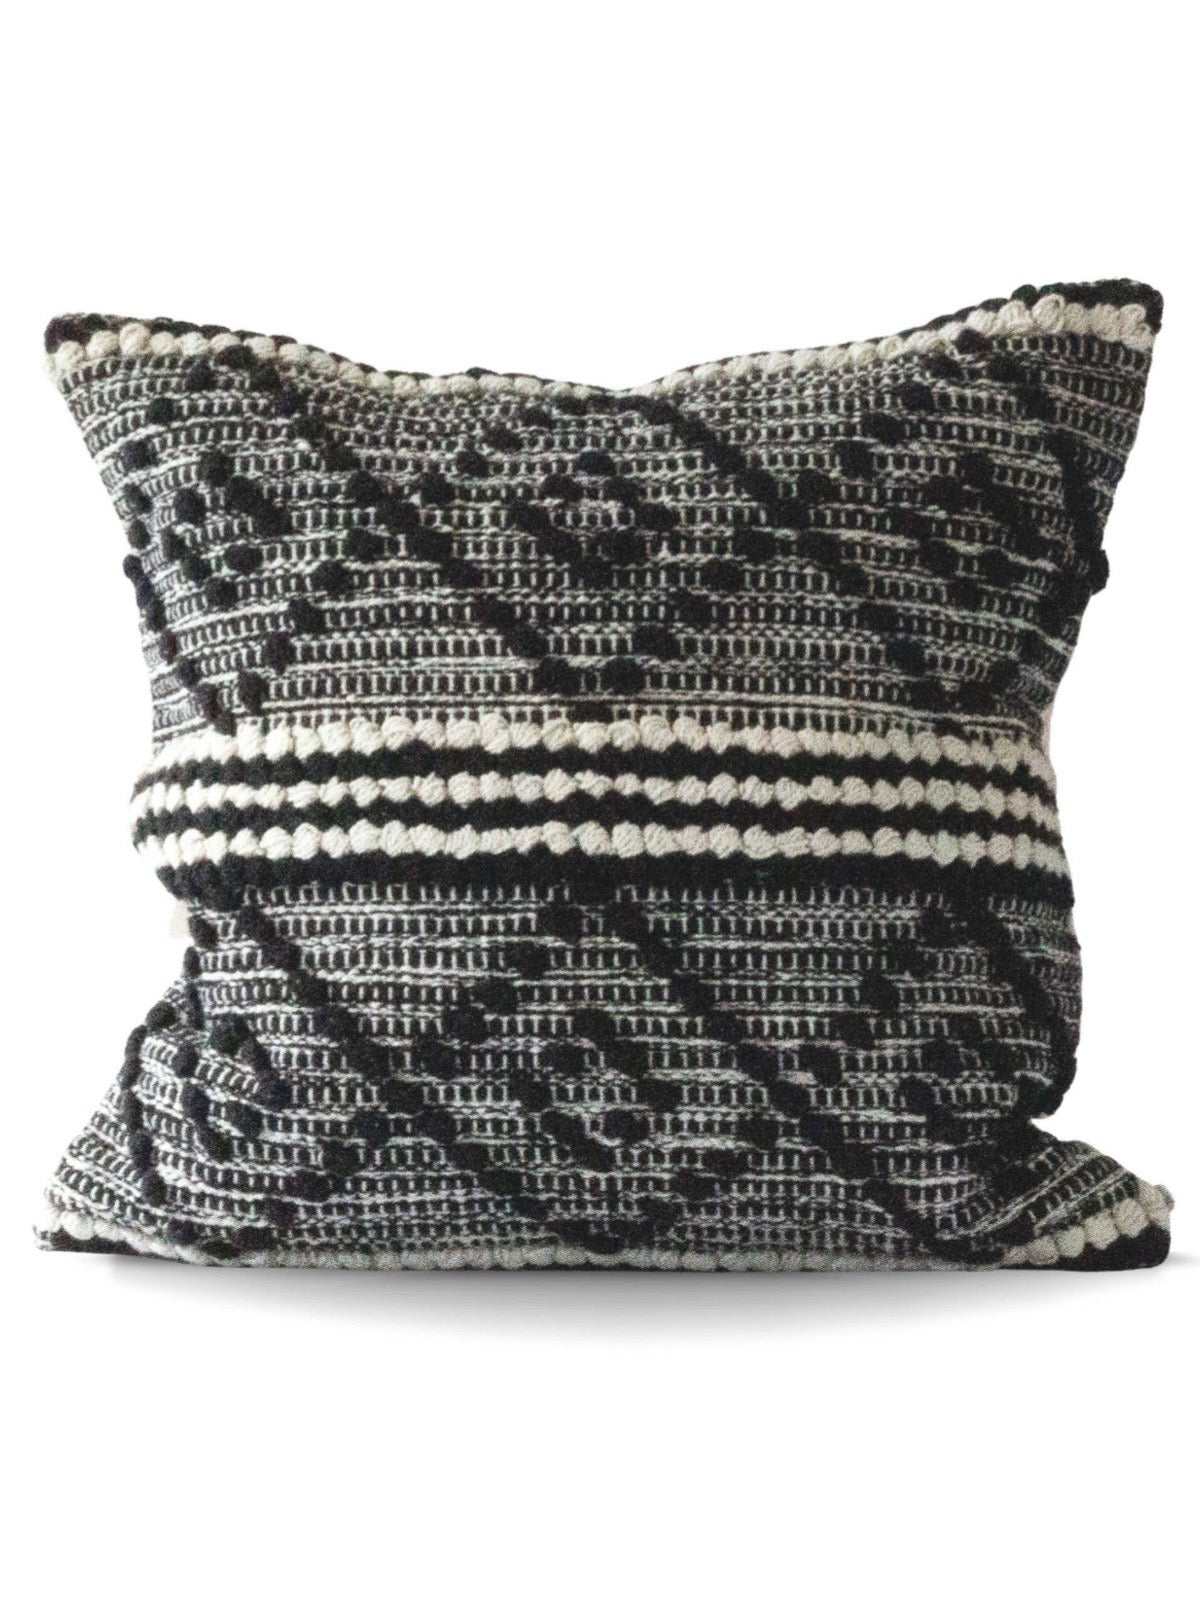 Add a boho flare to any space with the 18x18 Nubia Variegated Pillow Cover. With its geometric textures and calming hues this Pillow cover is perfect for any couch, chair, or bed. Sold by KYA Home Decor 